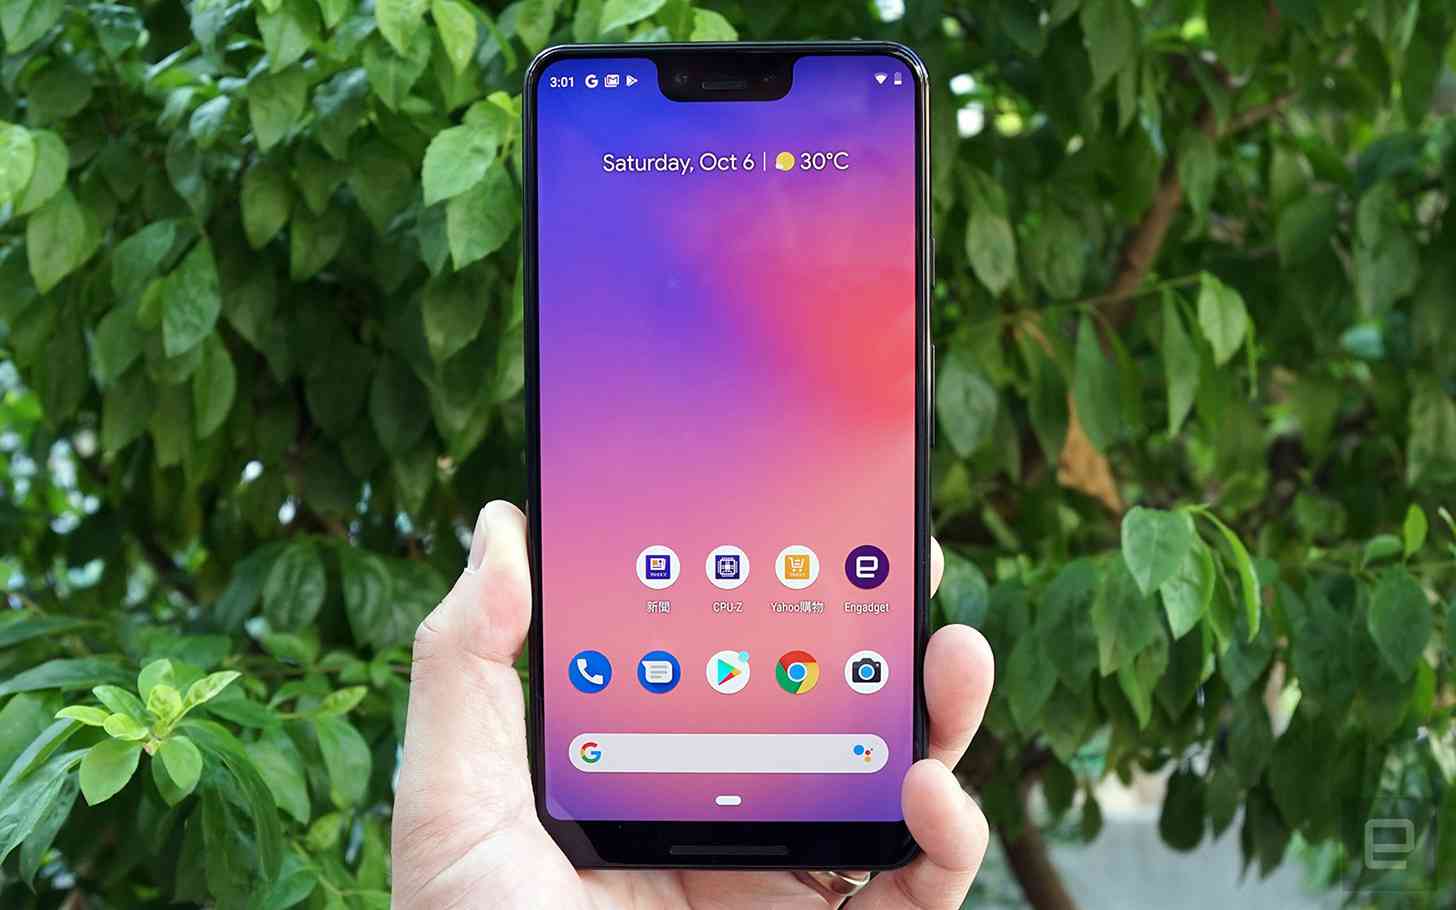 Google Pixel 3 XL hands-on early